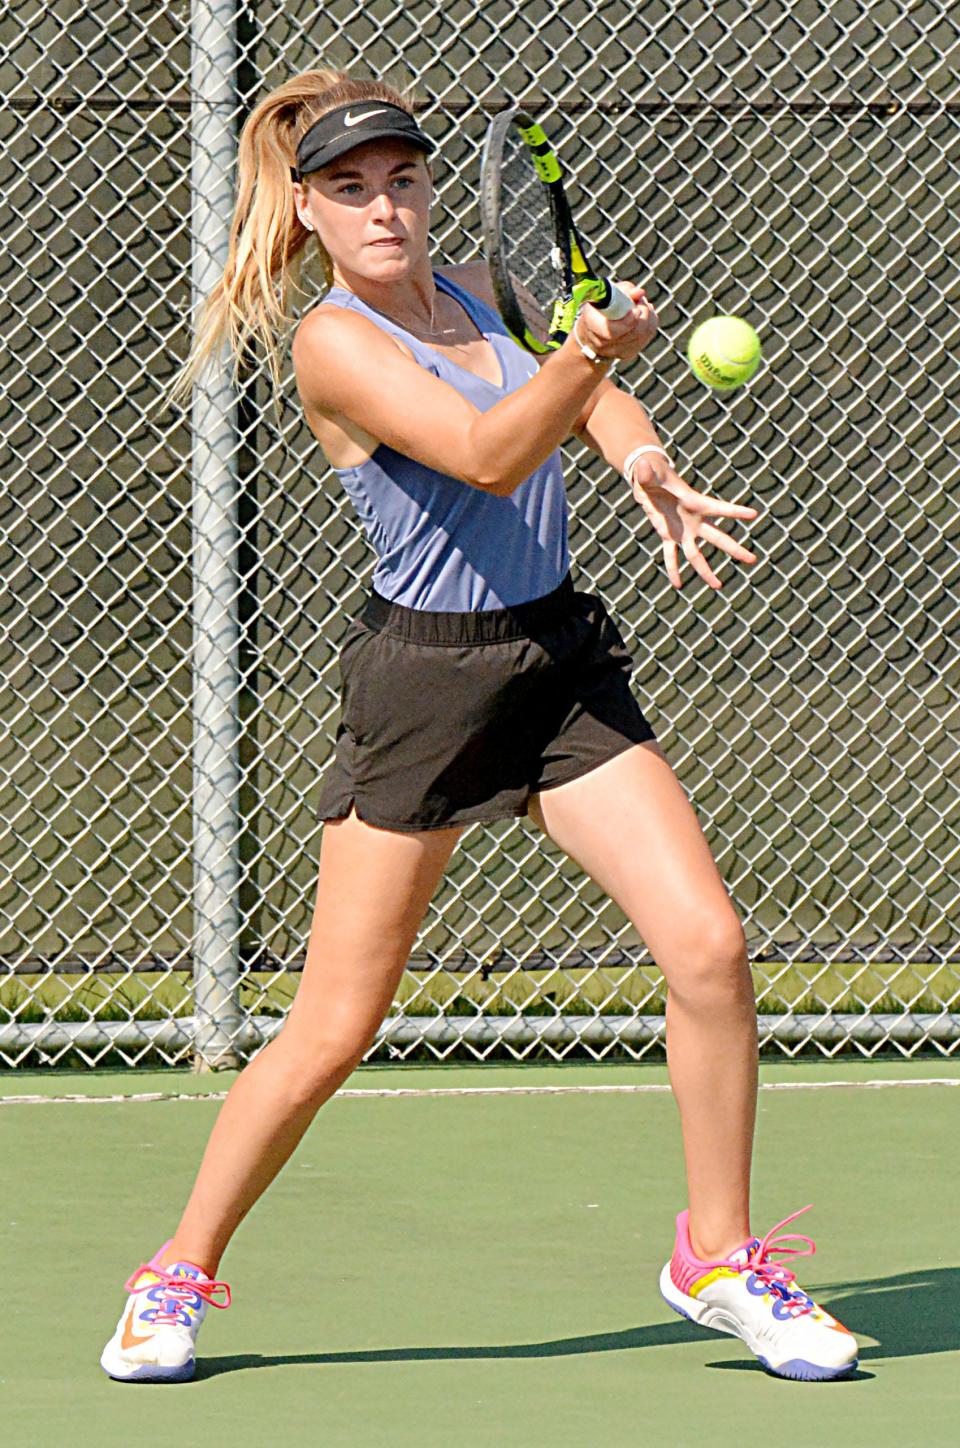 Watertown's Josie Heyn clubs a forehand return during Tuesday's high school girls tennis dual at the Highland Park Courts.